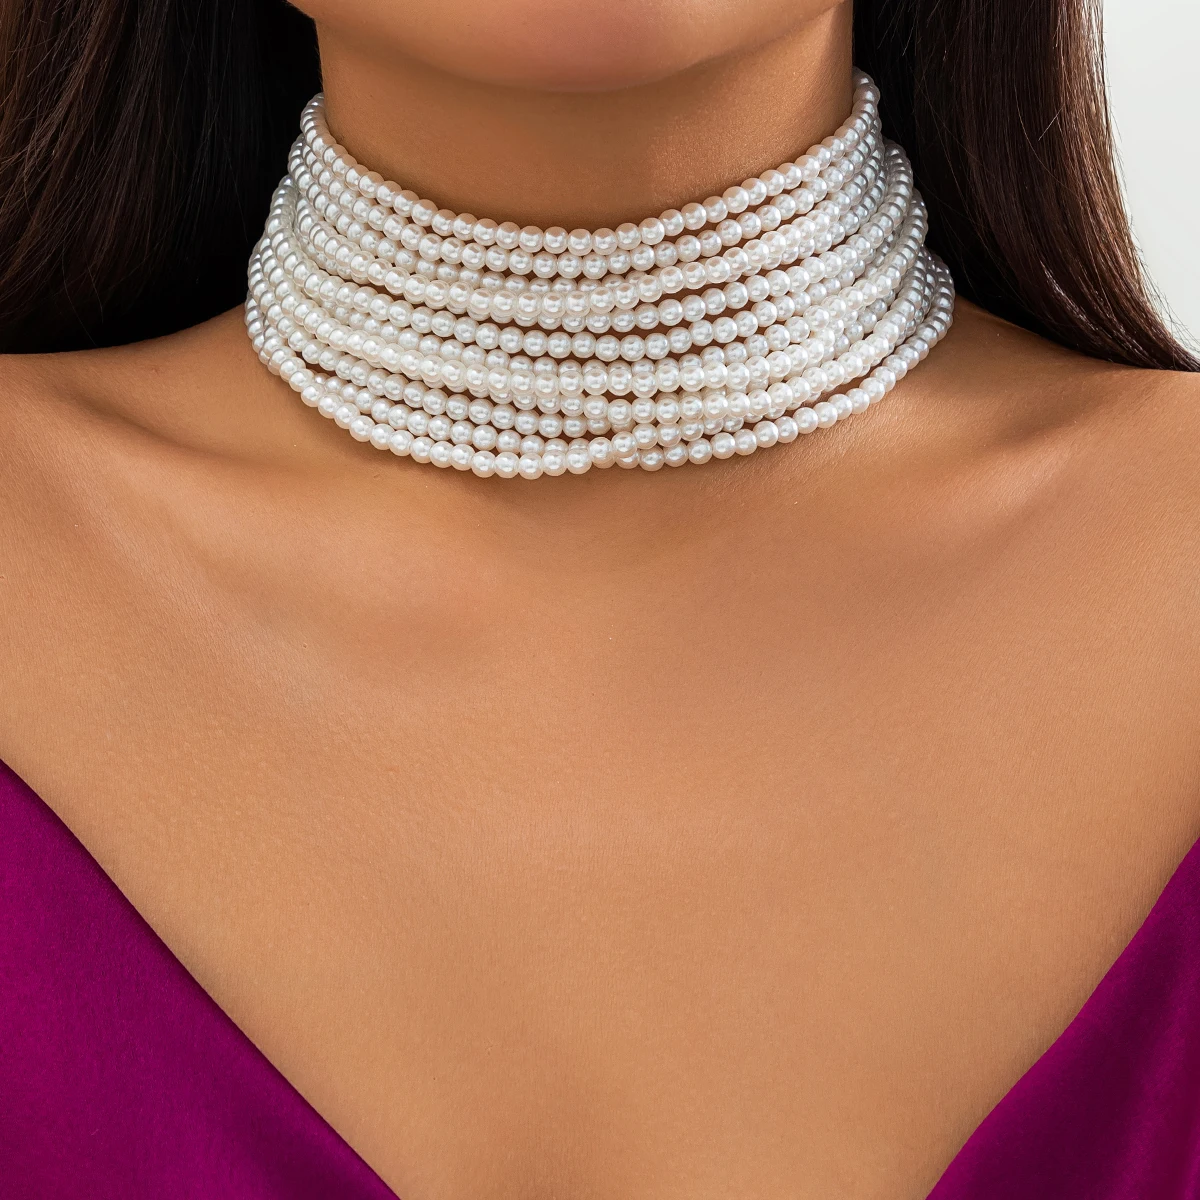 

SHIXIN Vintage Elegant Multi layered White Pearl Beaded Choker Necklace for Women Exaggerated Bridal Wedding Party Jewelry Gift